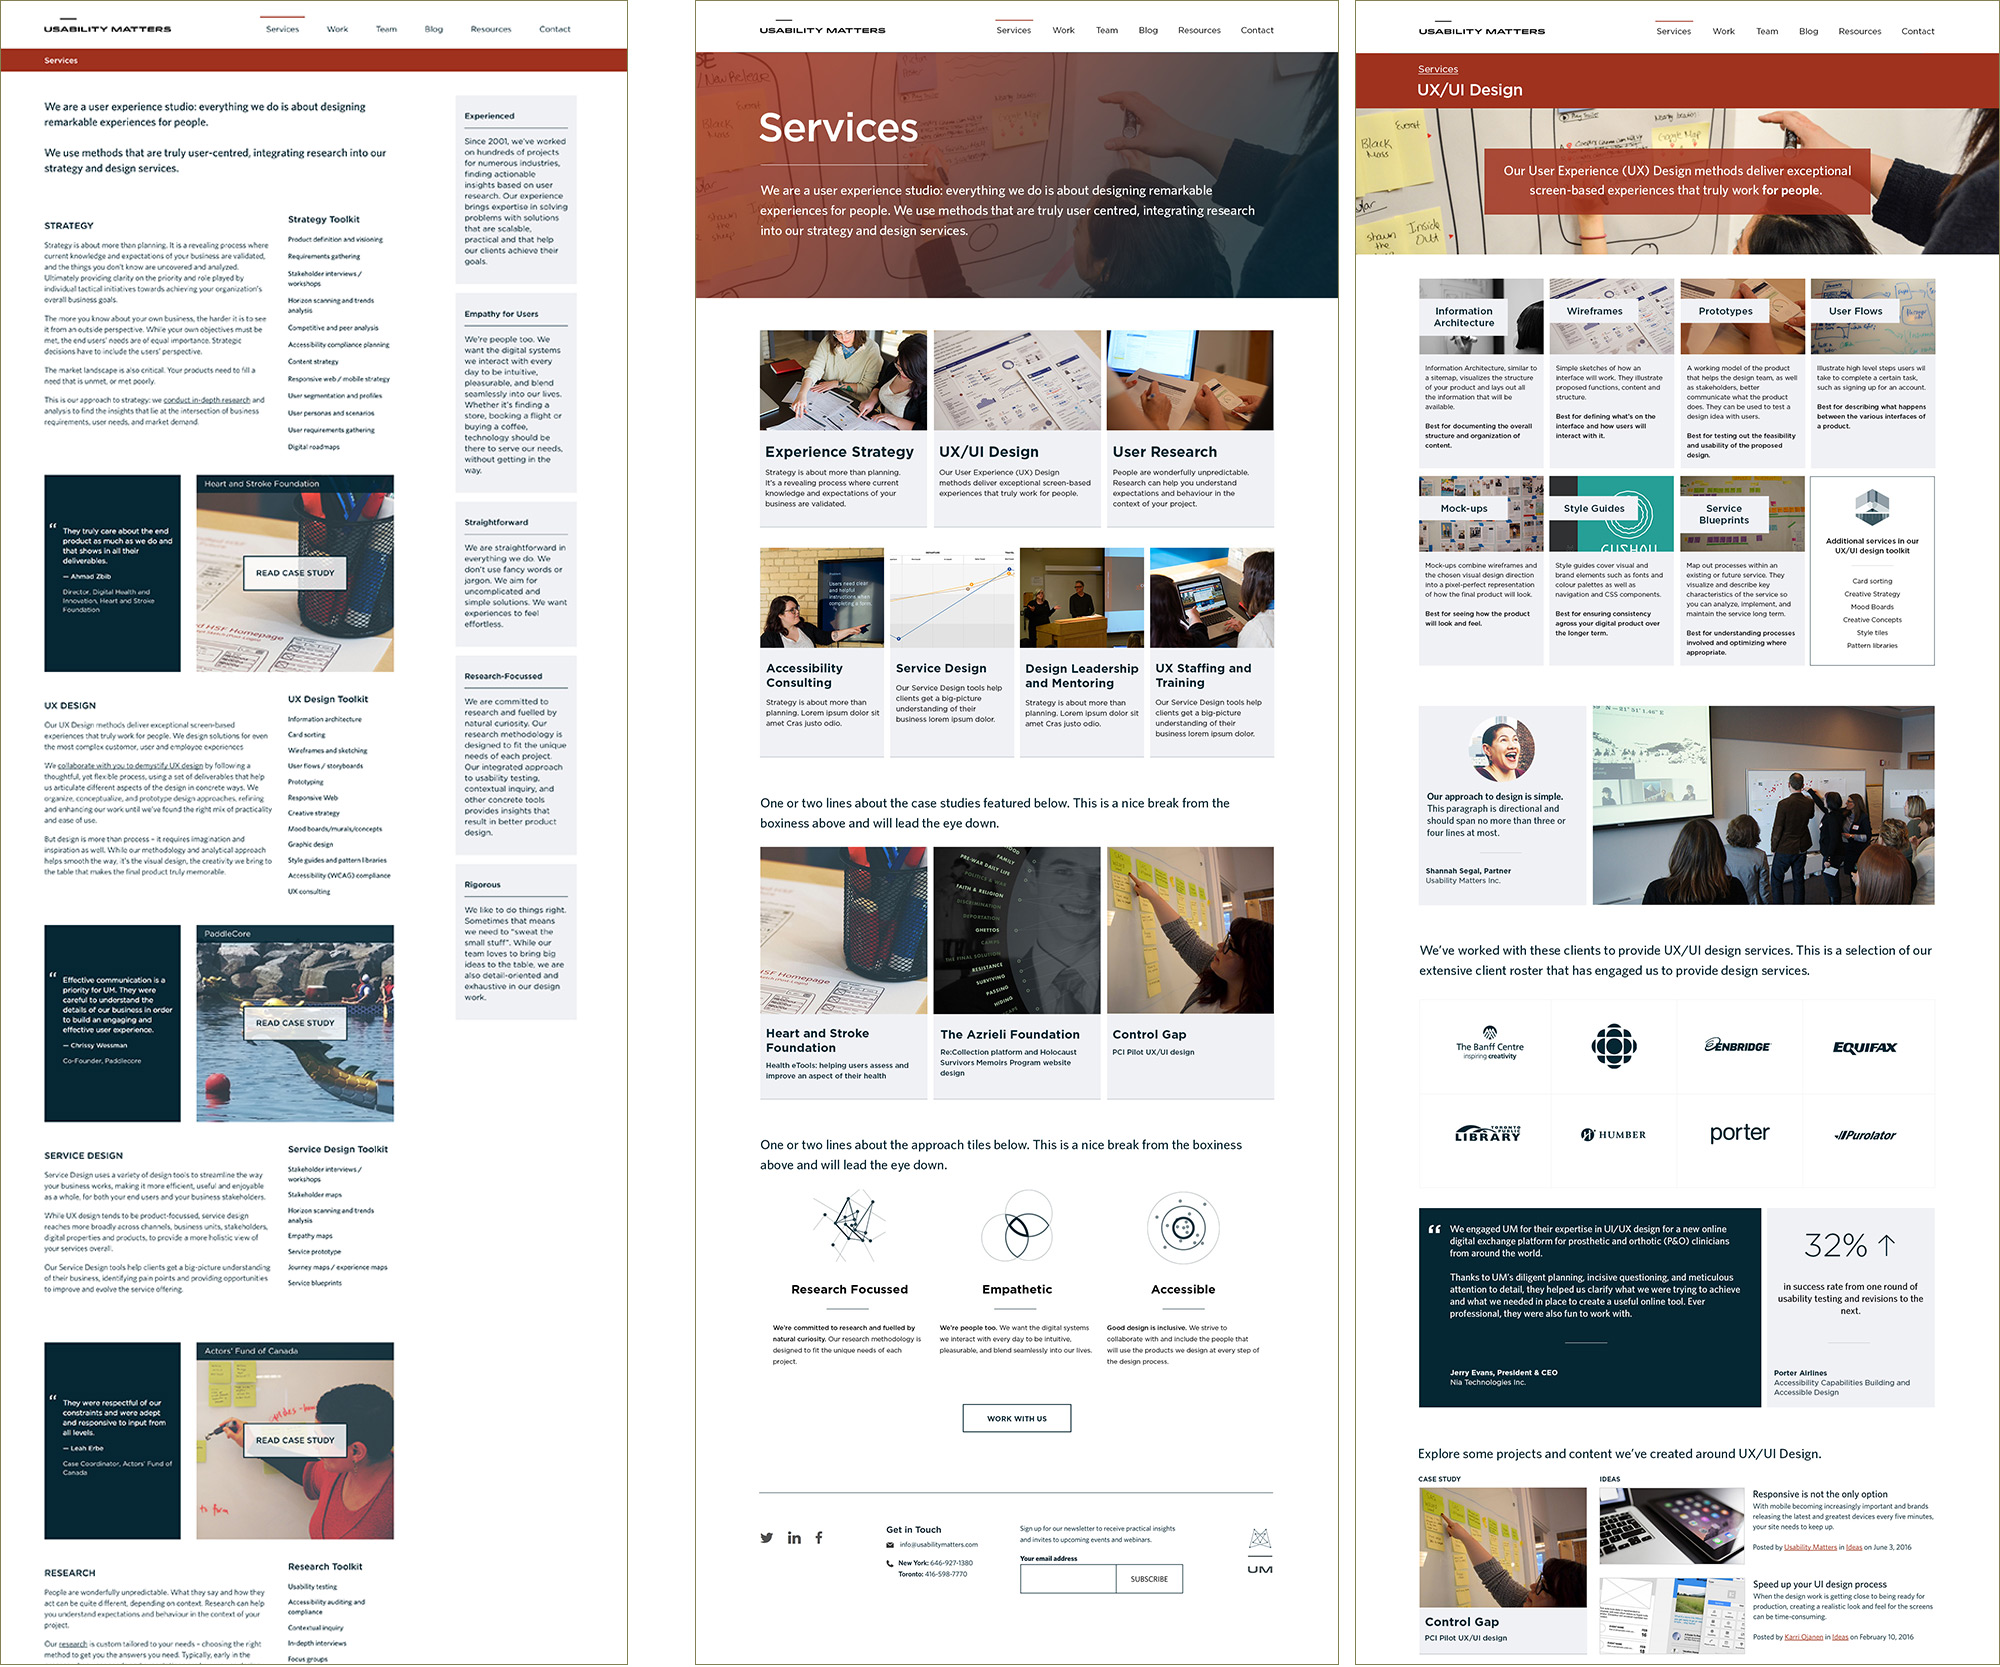 Visual design mockups of the evolution of the services page.